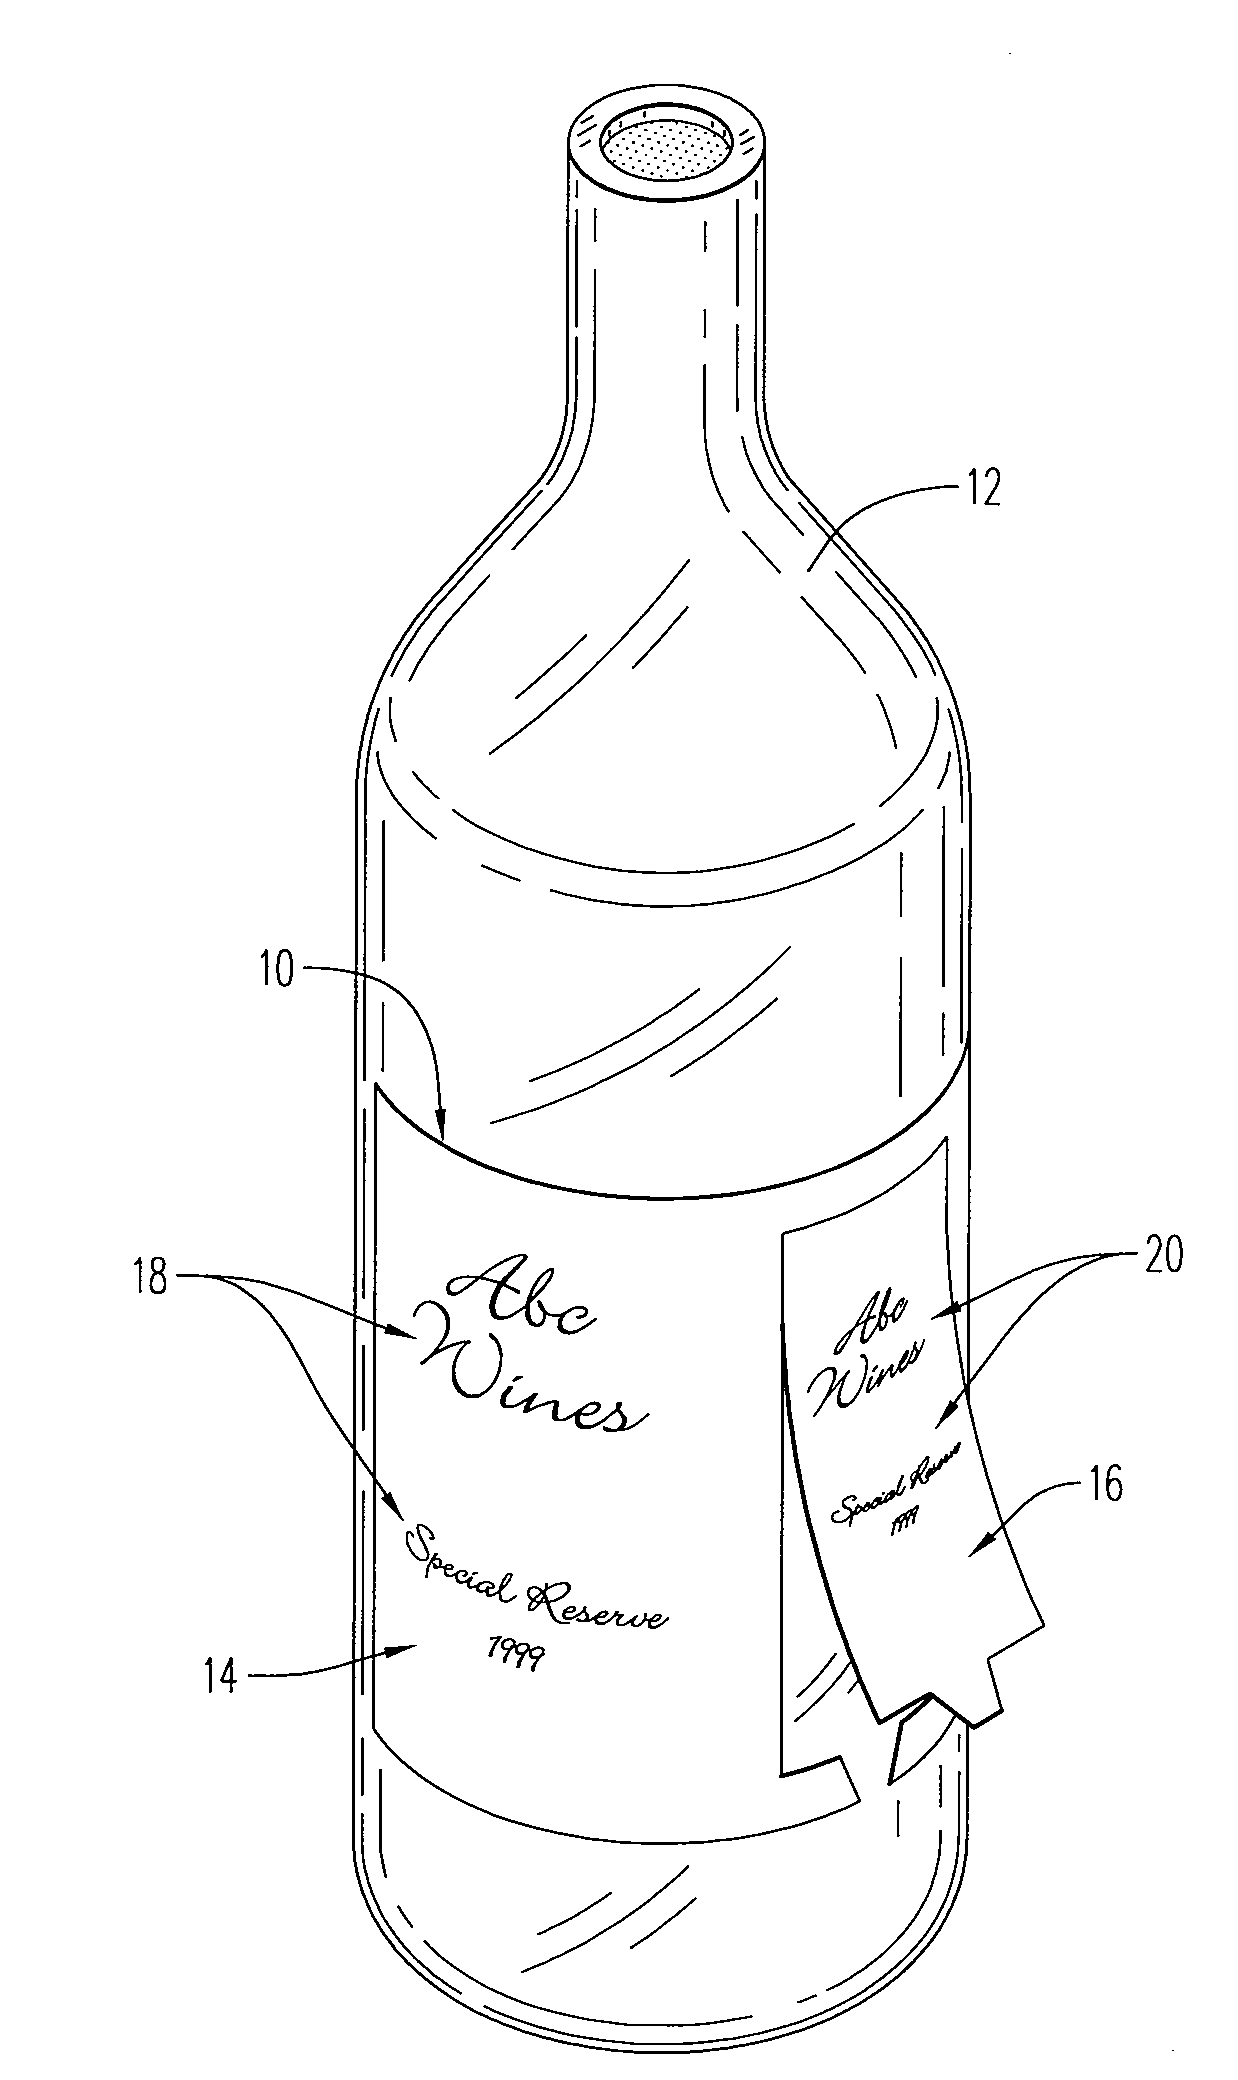 Product labels having removable portions having adhesive and backing thereon